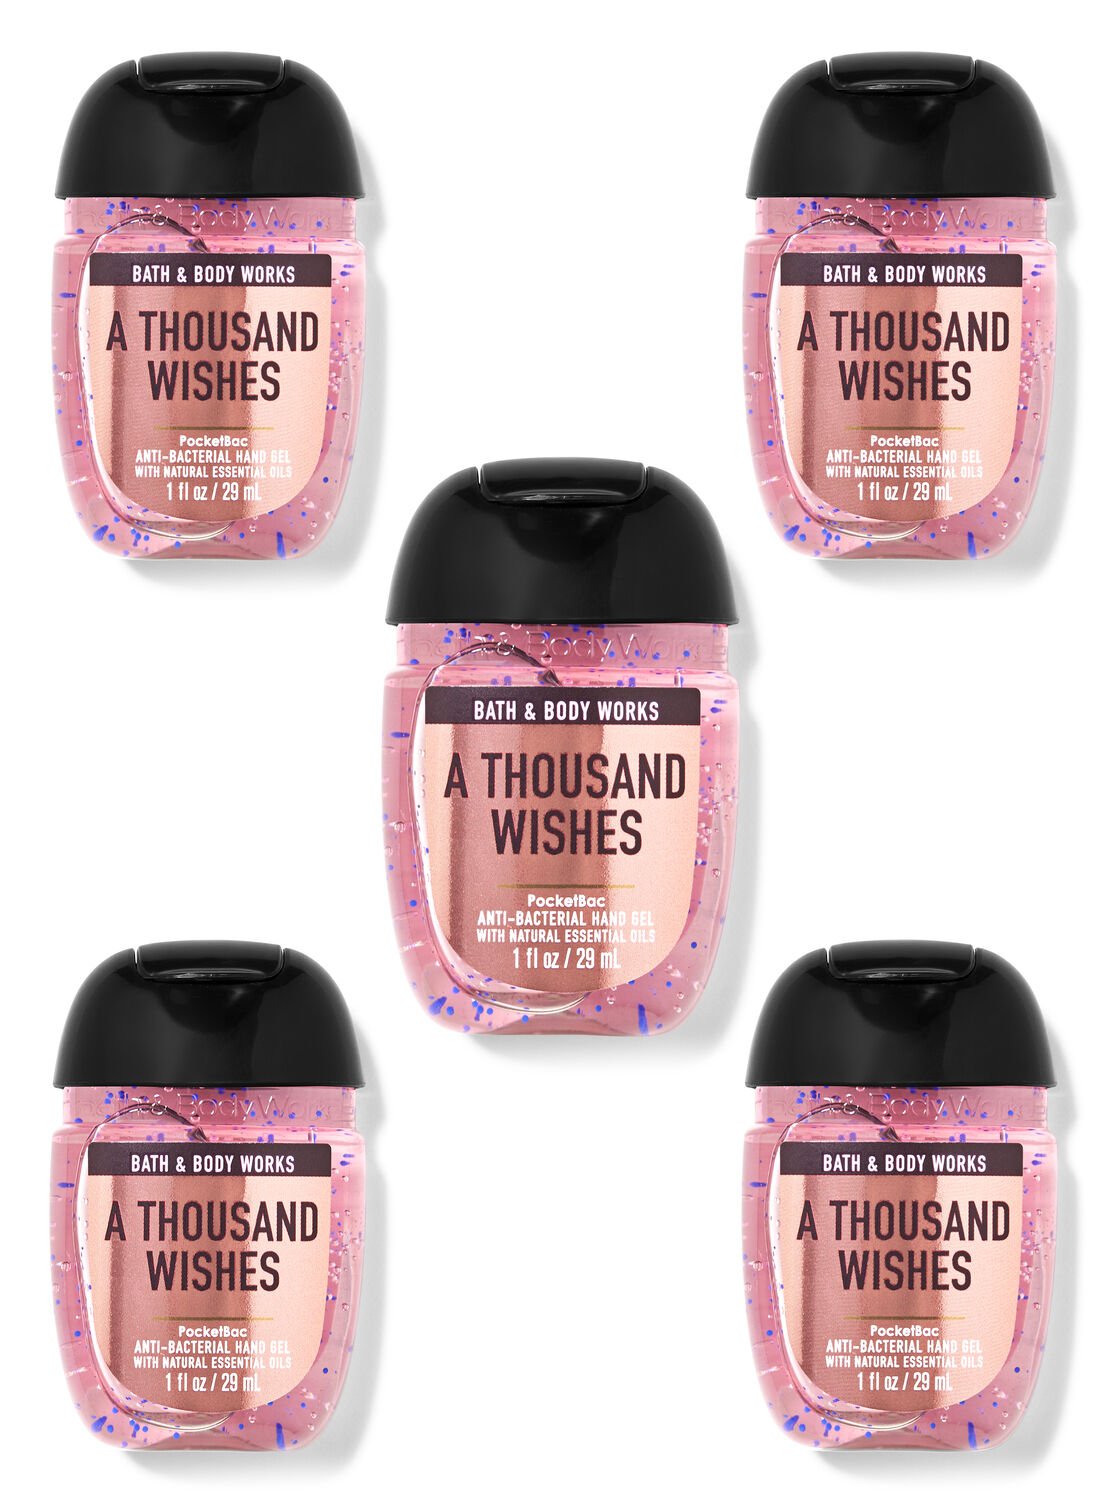 A Thousand Wishes PocketBac Hand Sanitizers, 5-Pack